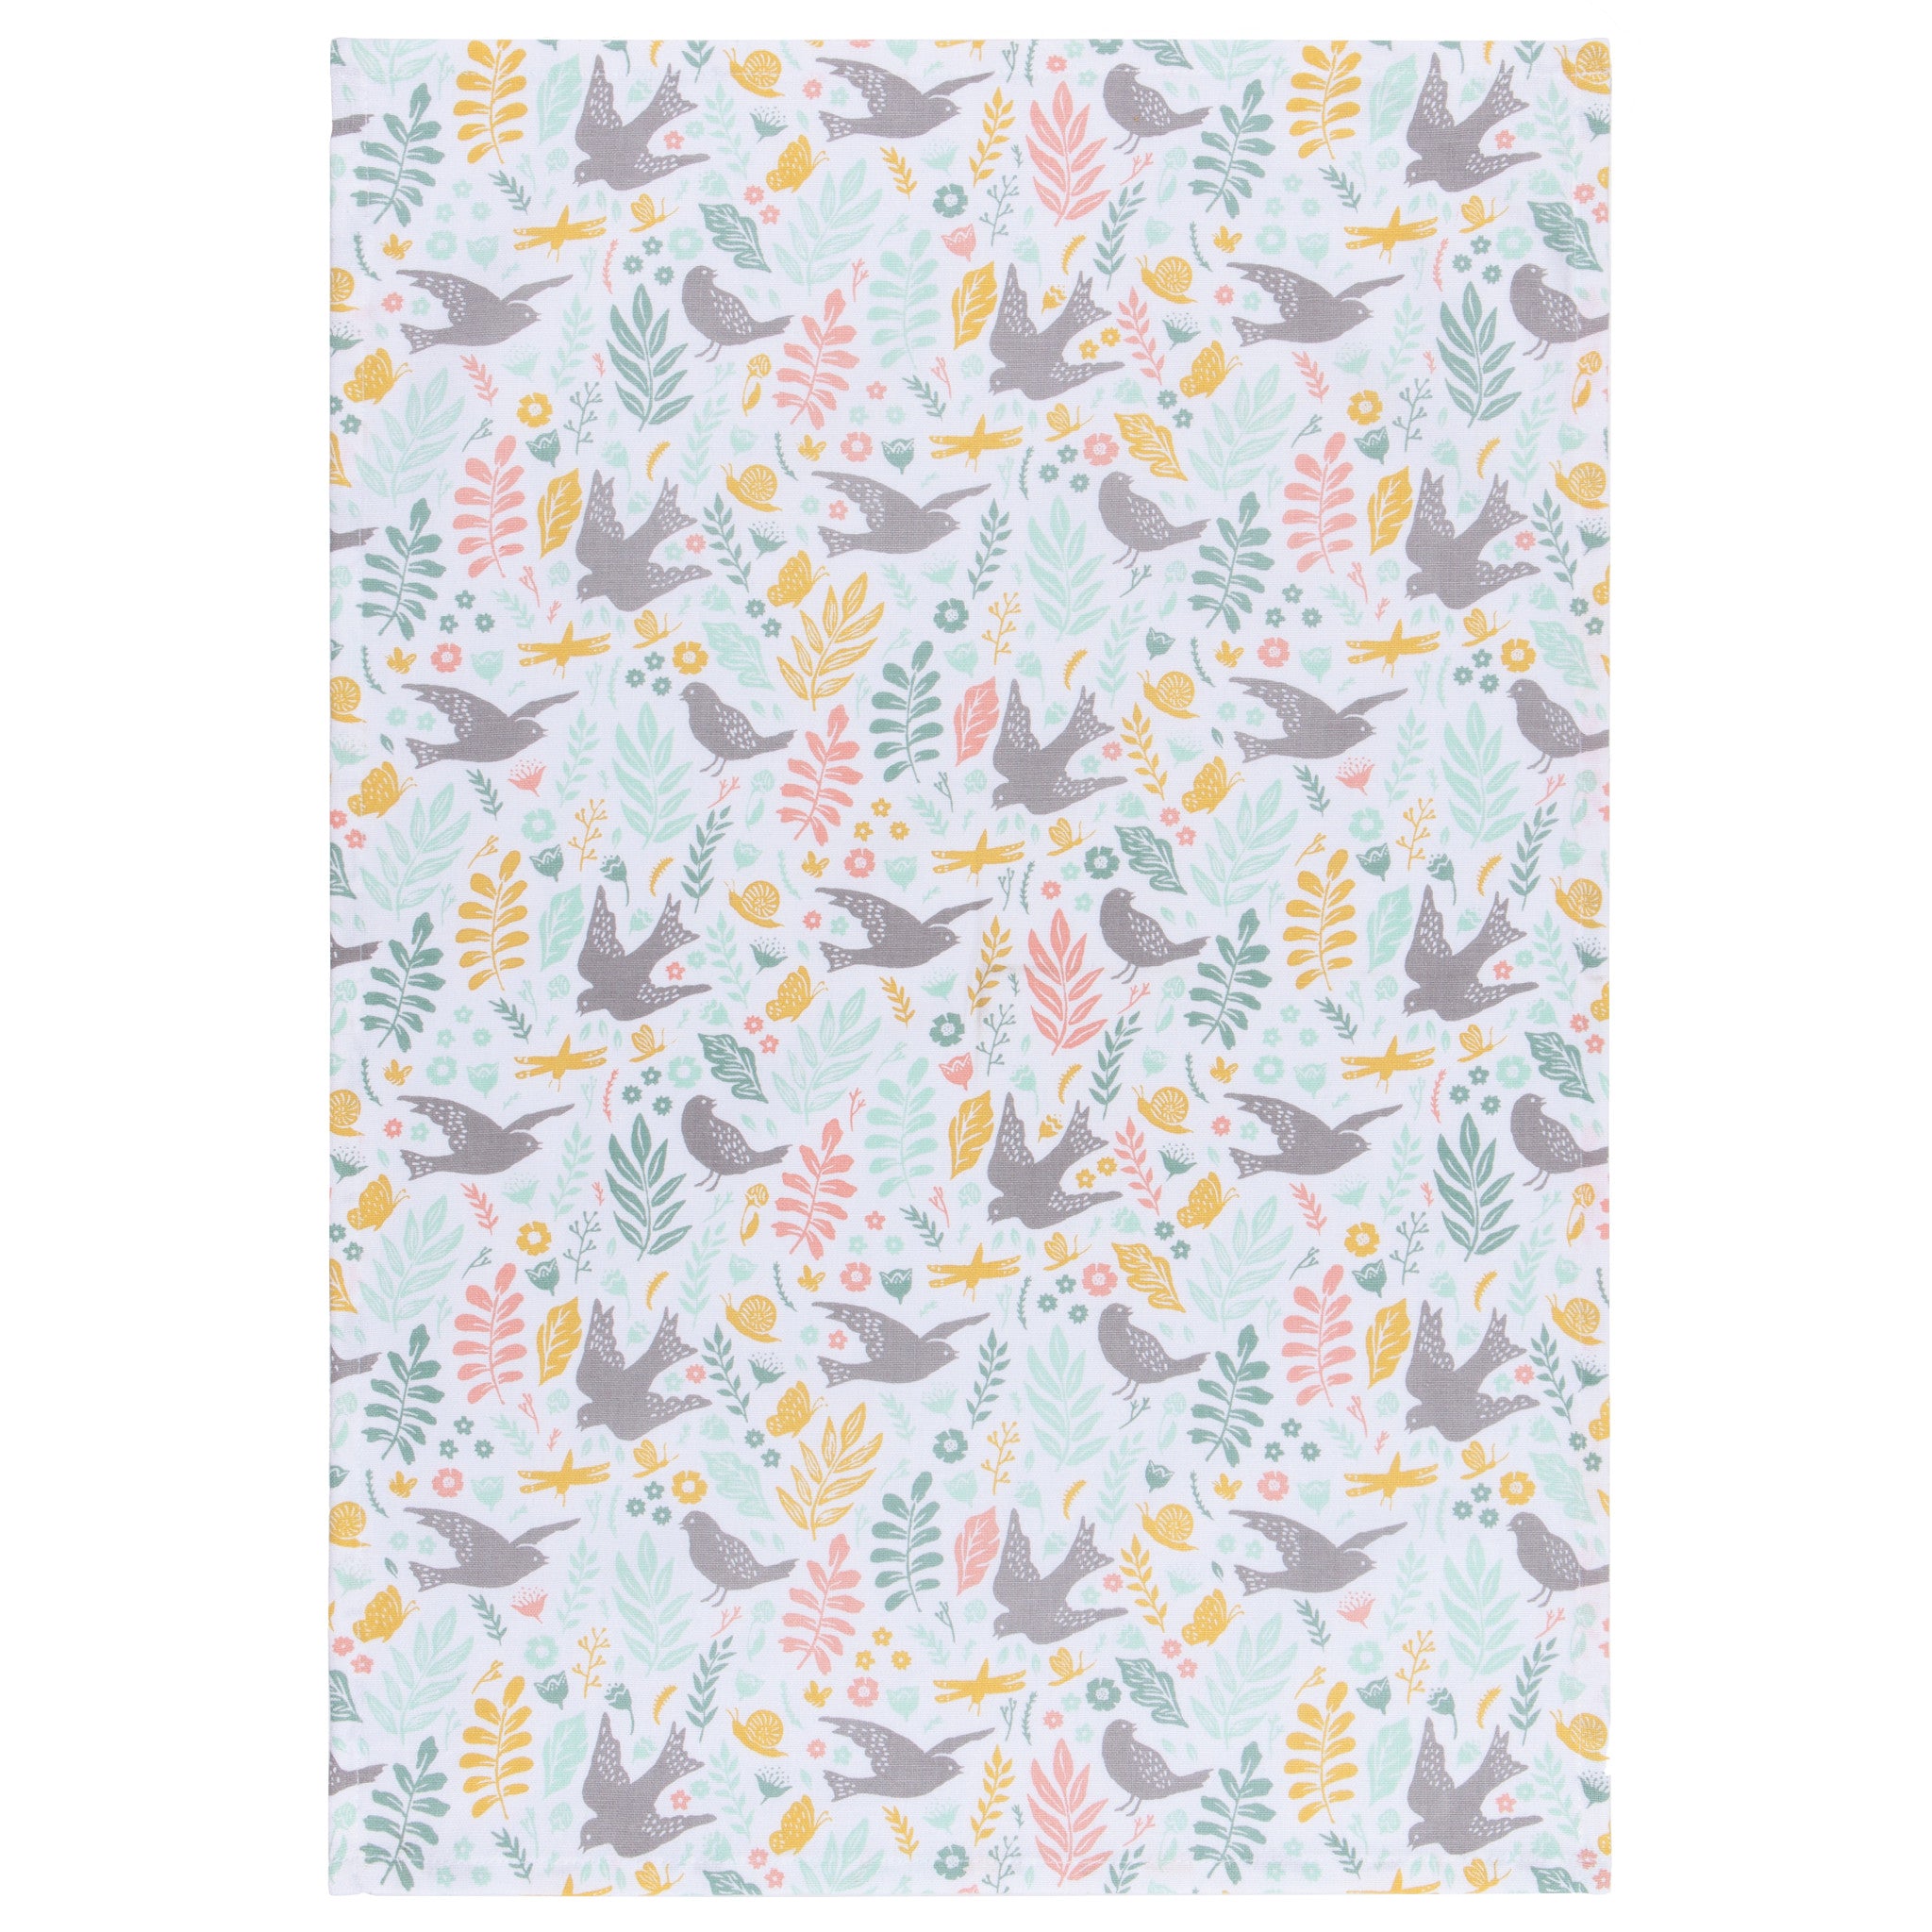 Bees and Butterflies Dish Towel